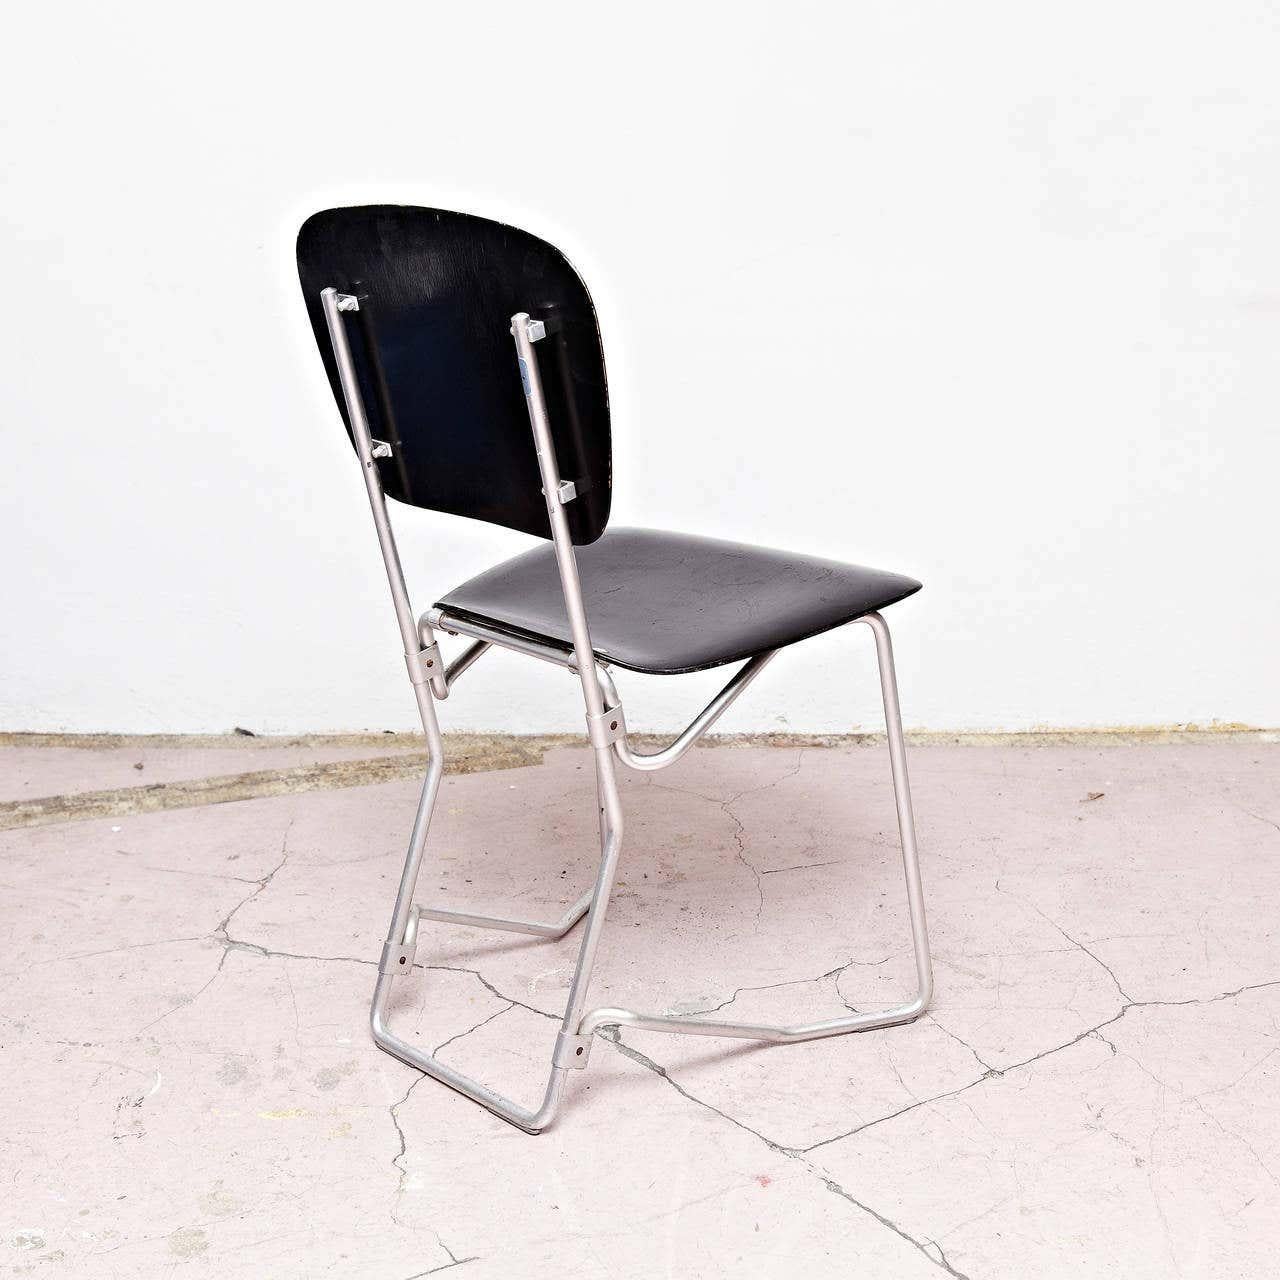 Aluminum Armin Wirth Mid-Century Modern Metal and Wood Swiss Stackable Chairs for Aluflex